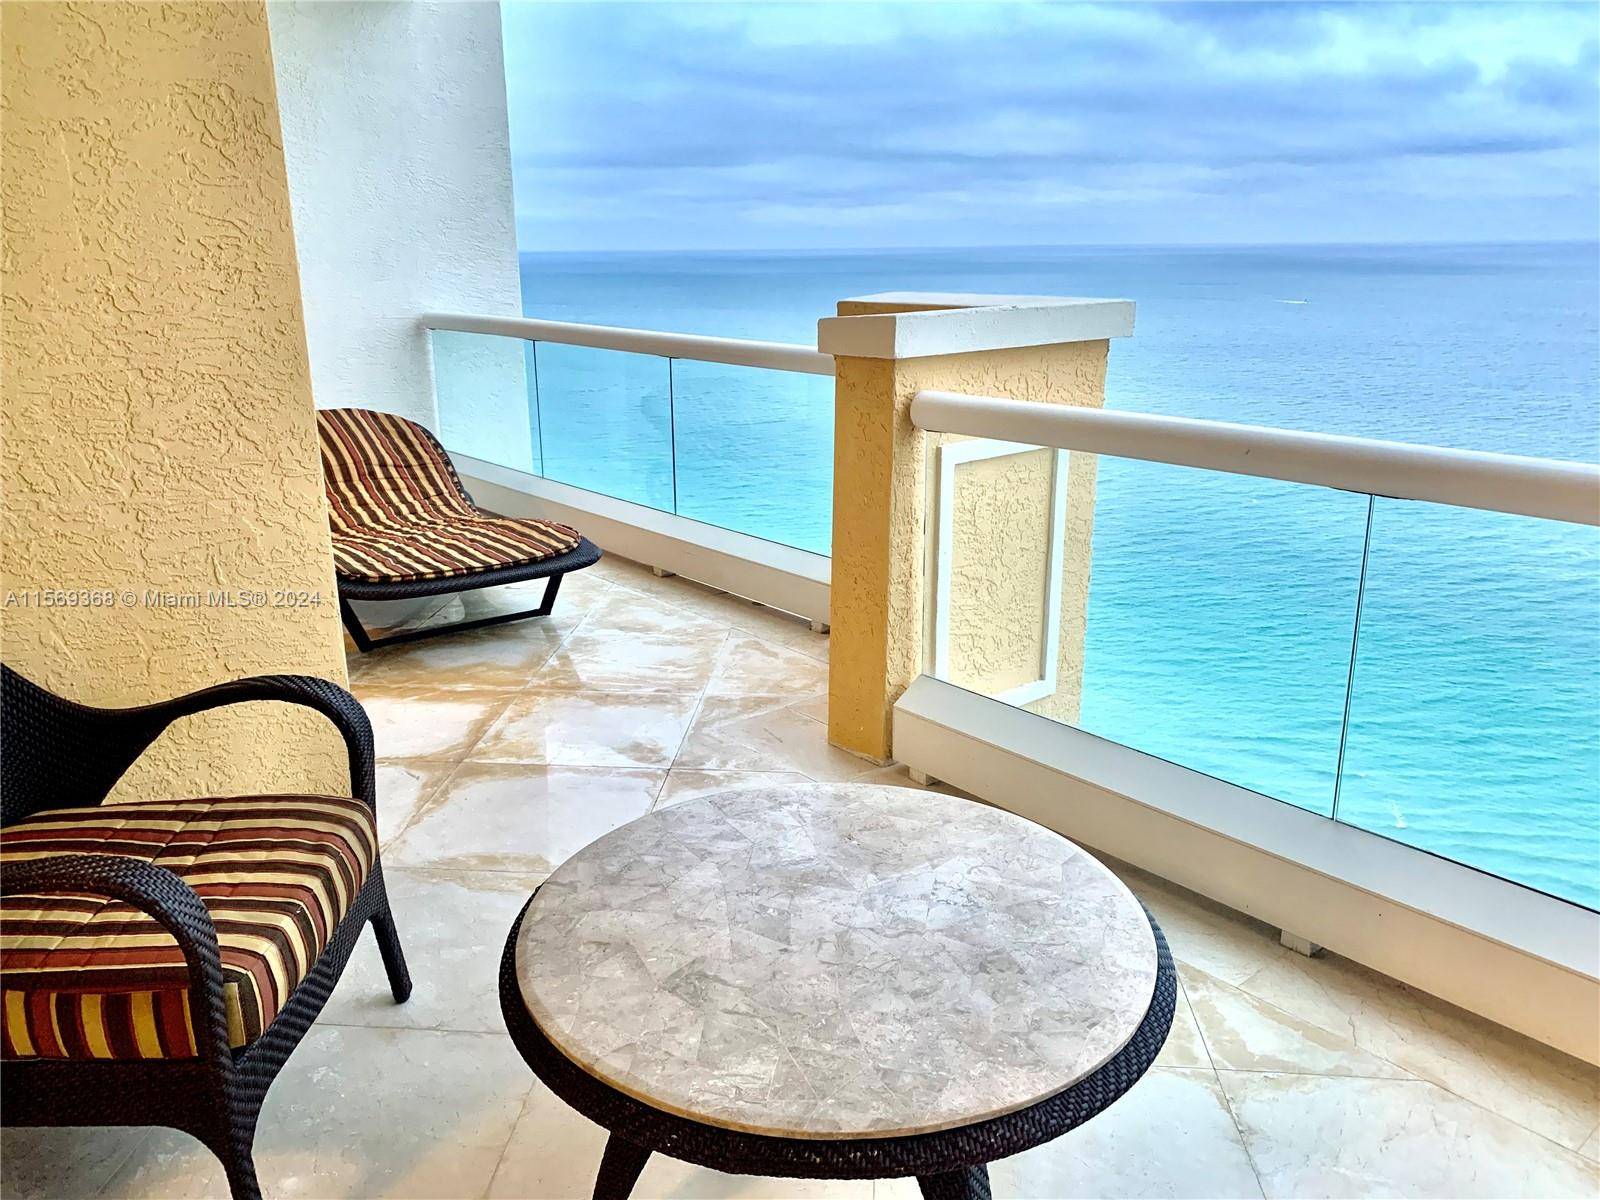 BEAUTIFUL 3 3 UNIT IN LUXURY ACQUALINA WITH BREATHTAKING OCEAN AND INTRACOASTAL VIEW AND 5 STAR AMENITIES !